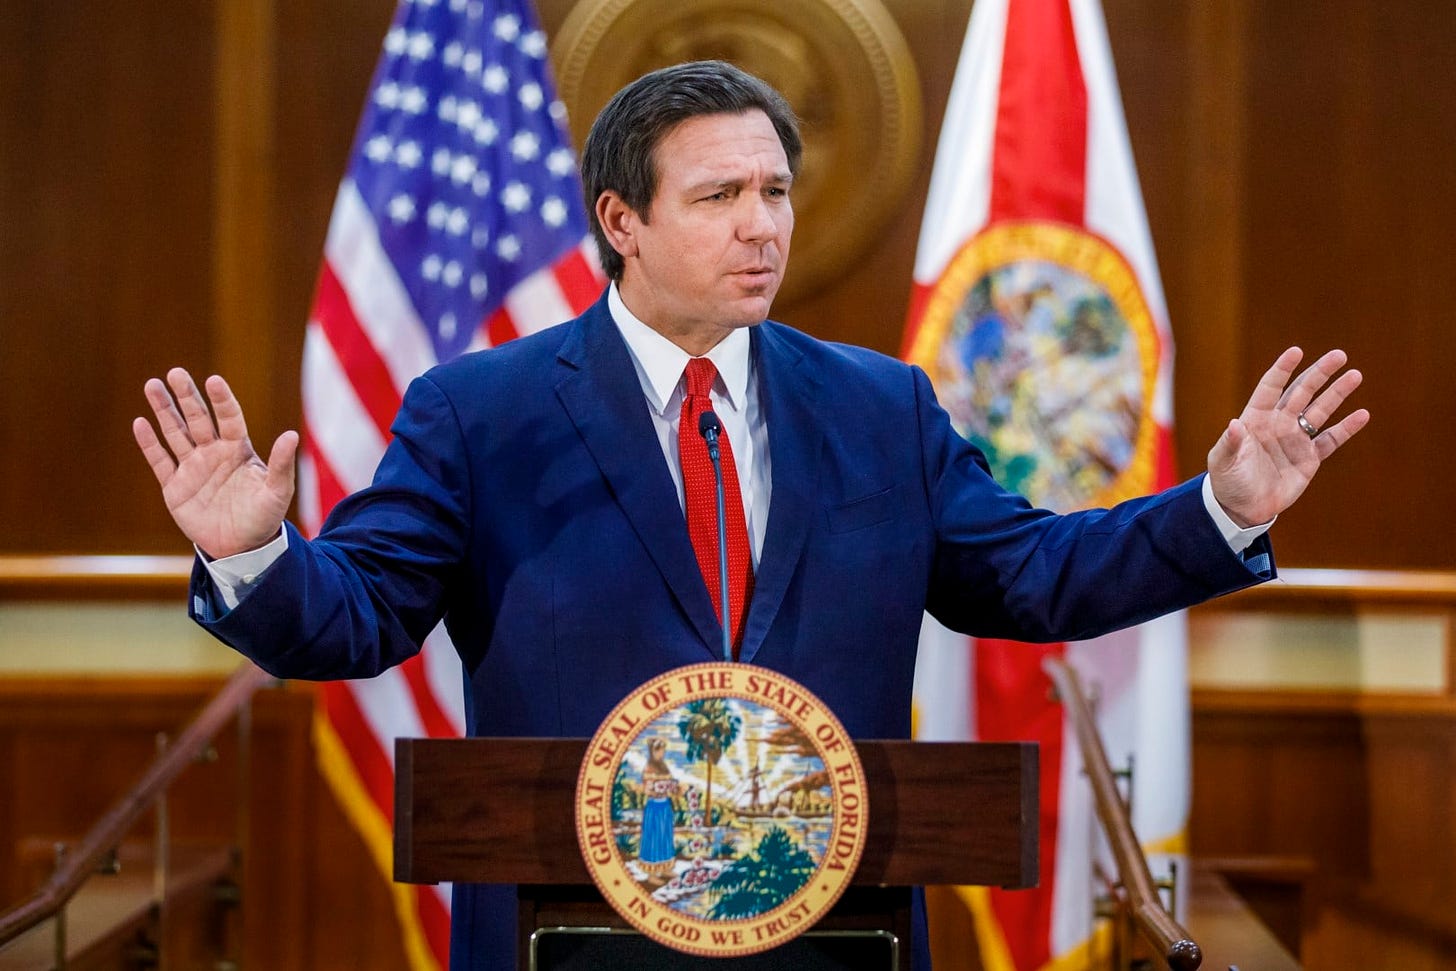 'We are not turning back': Gov. Ron DeSantis says schools will remain open despite CDC guidance